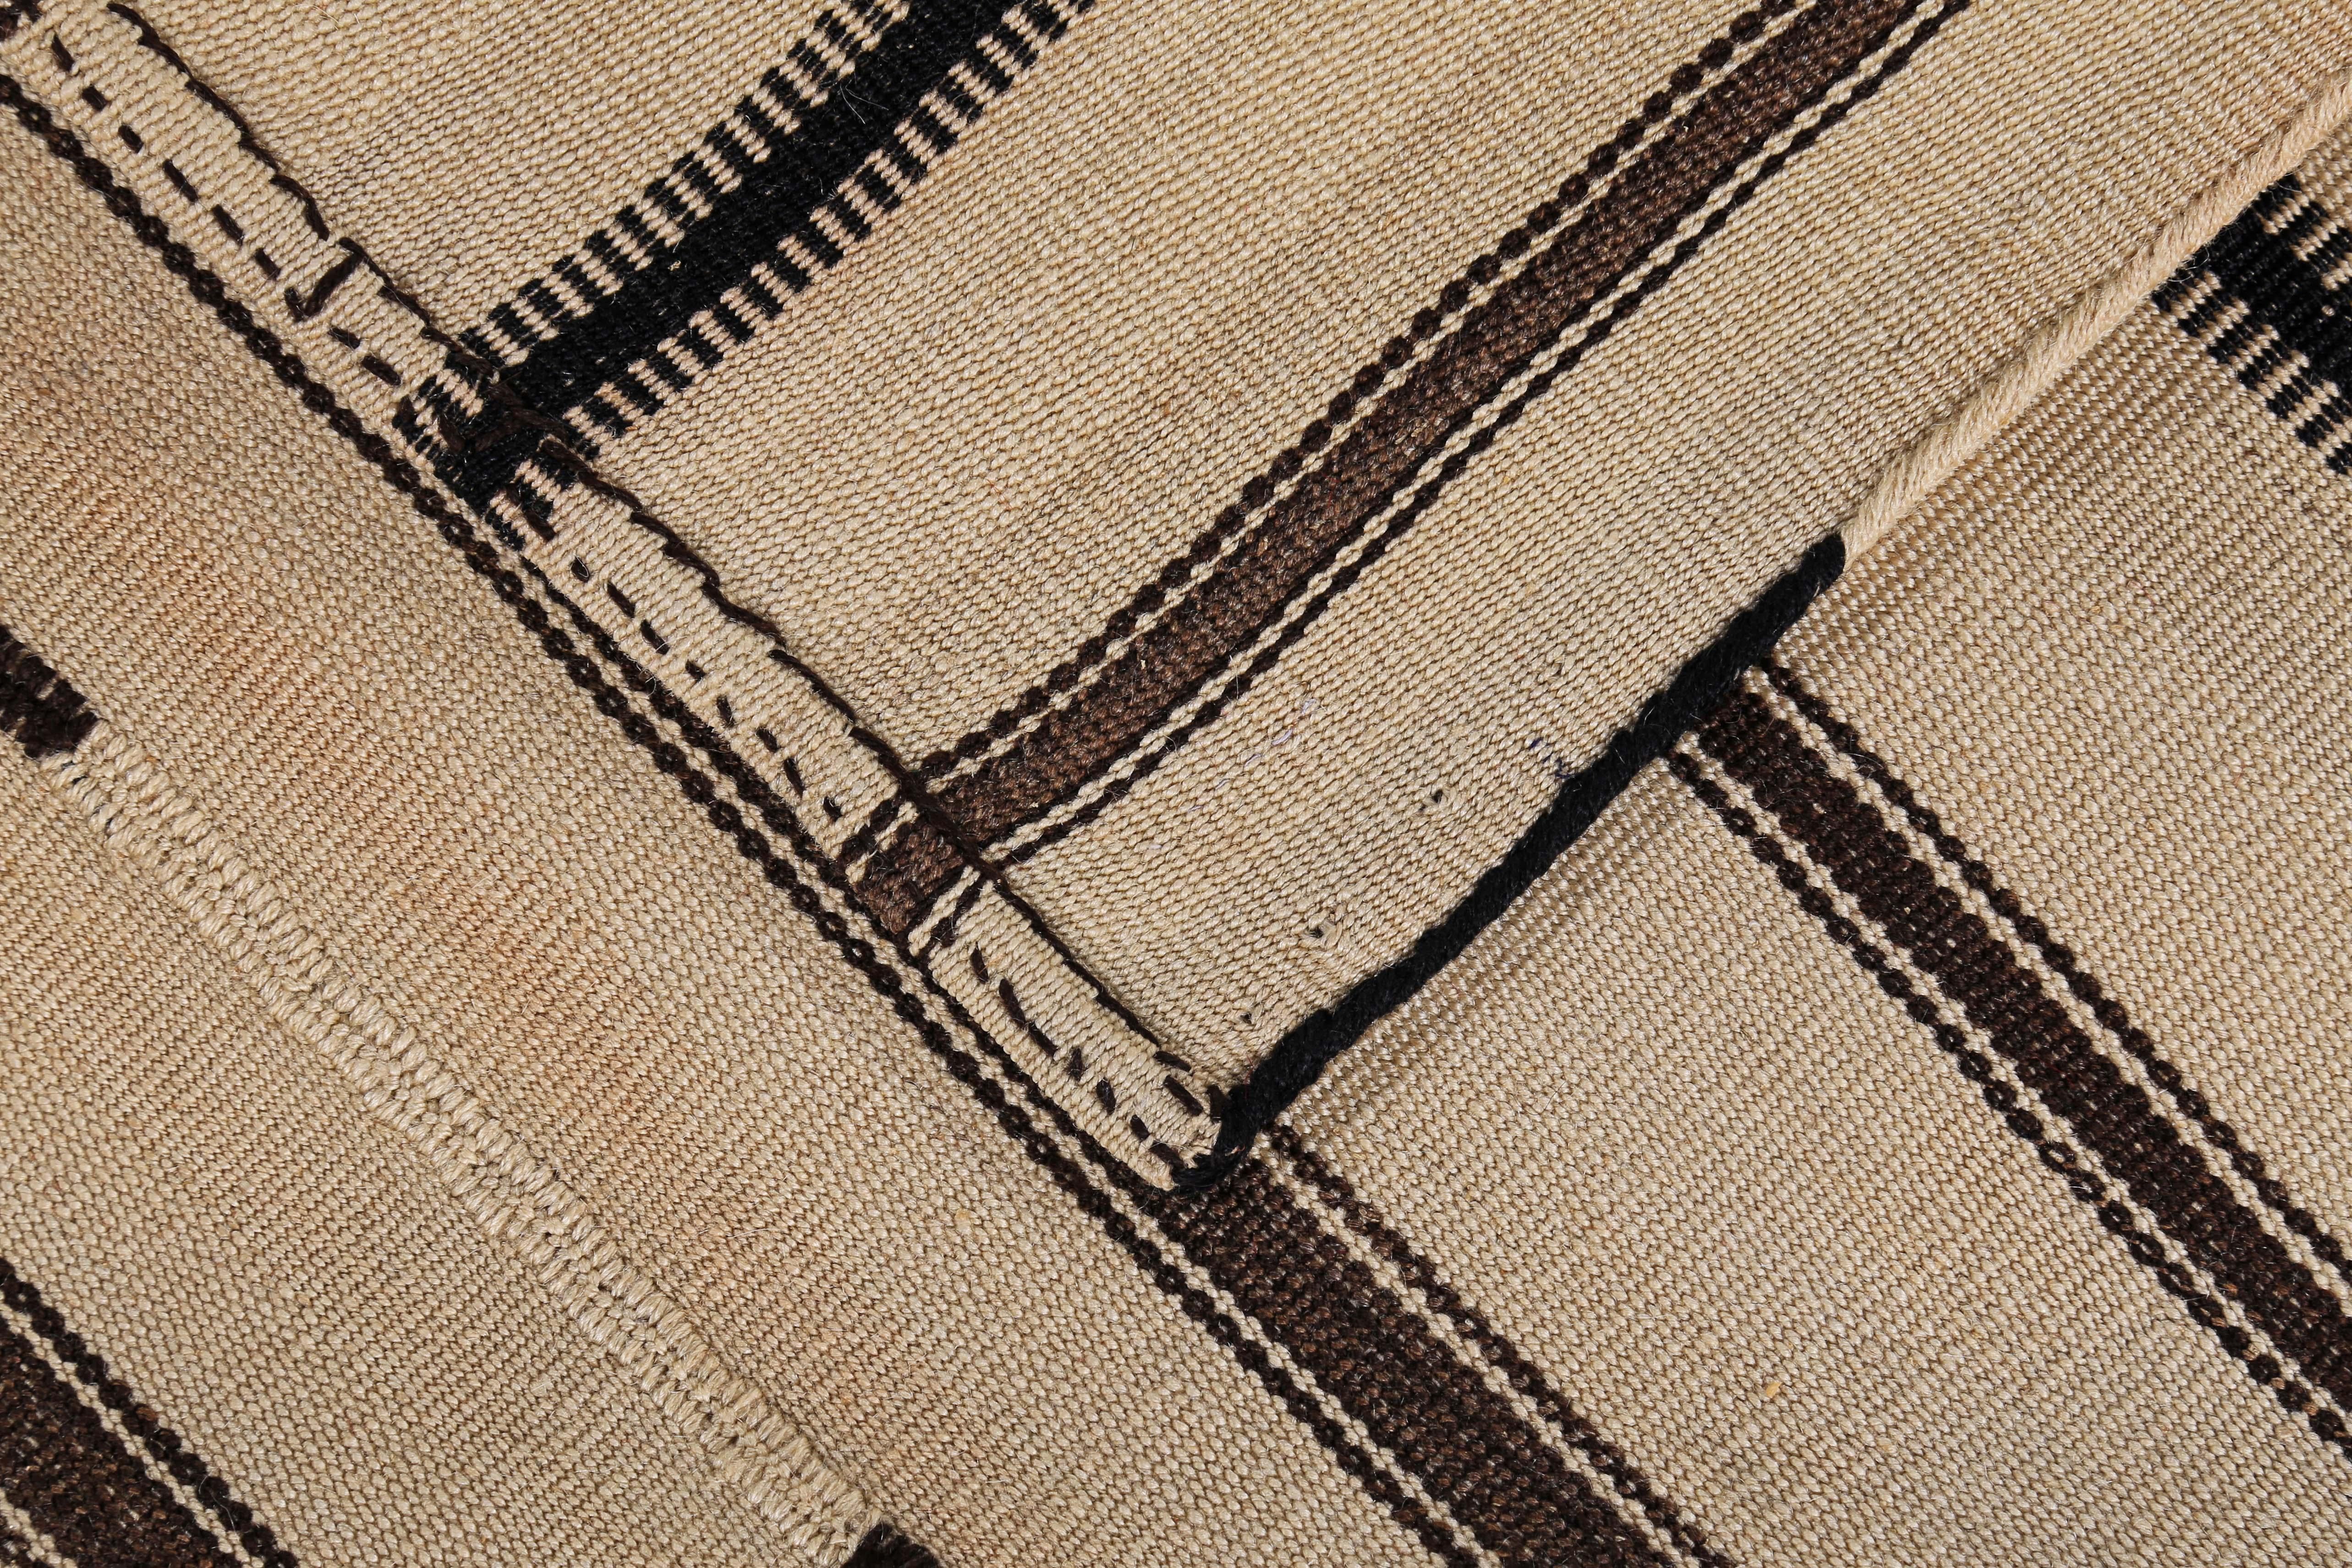 Contemporary Modern Turkish Kilim Rug with Black and Brown Pencil Stripes in a Beige Field For Sale